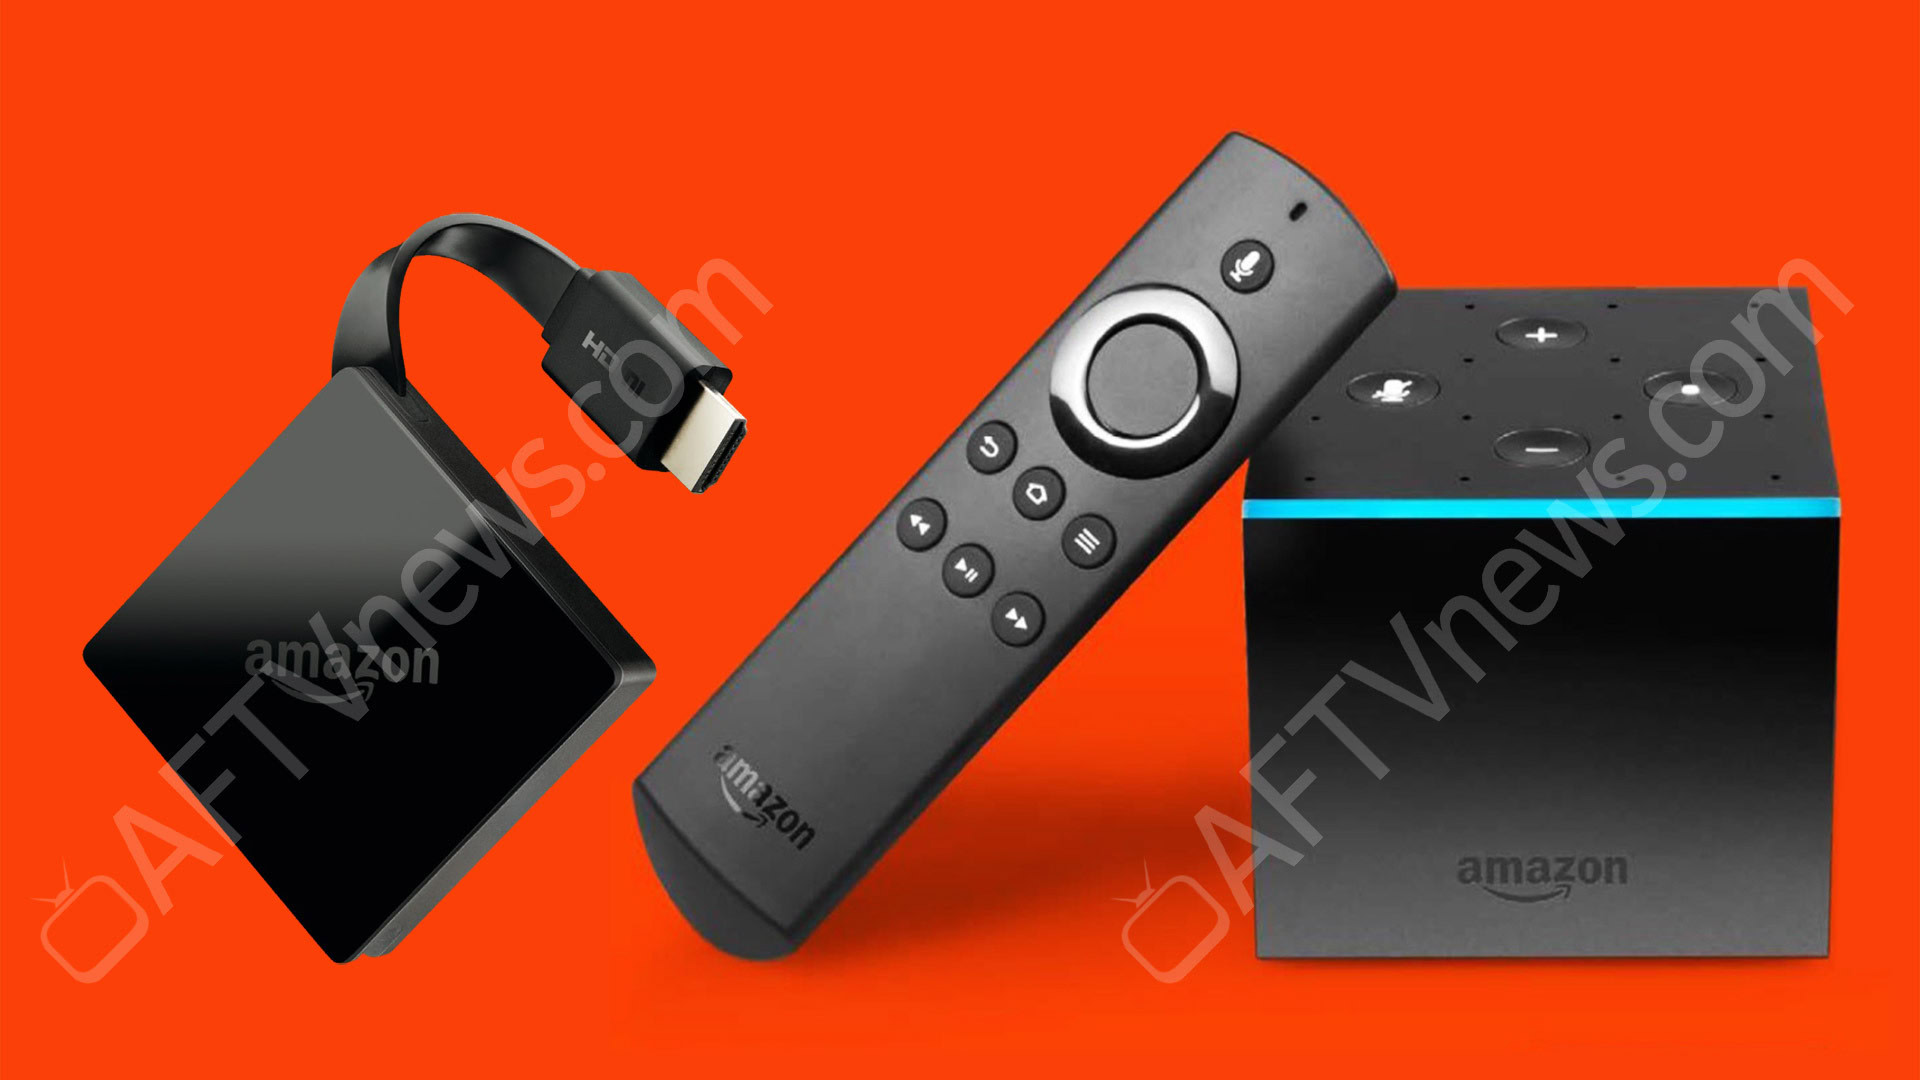 Leak reveals Amazon's new 4K Fire TV dongle and settop box with Alexa